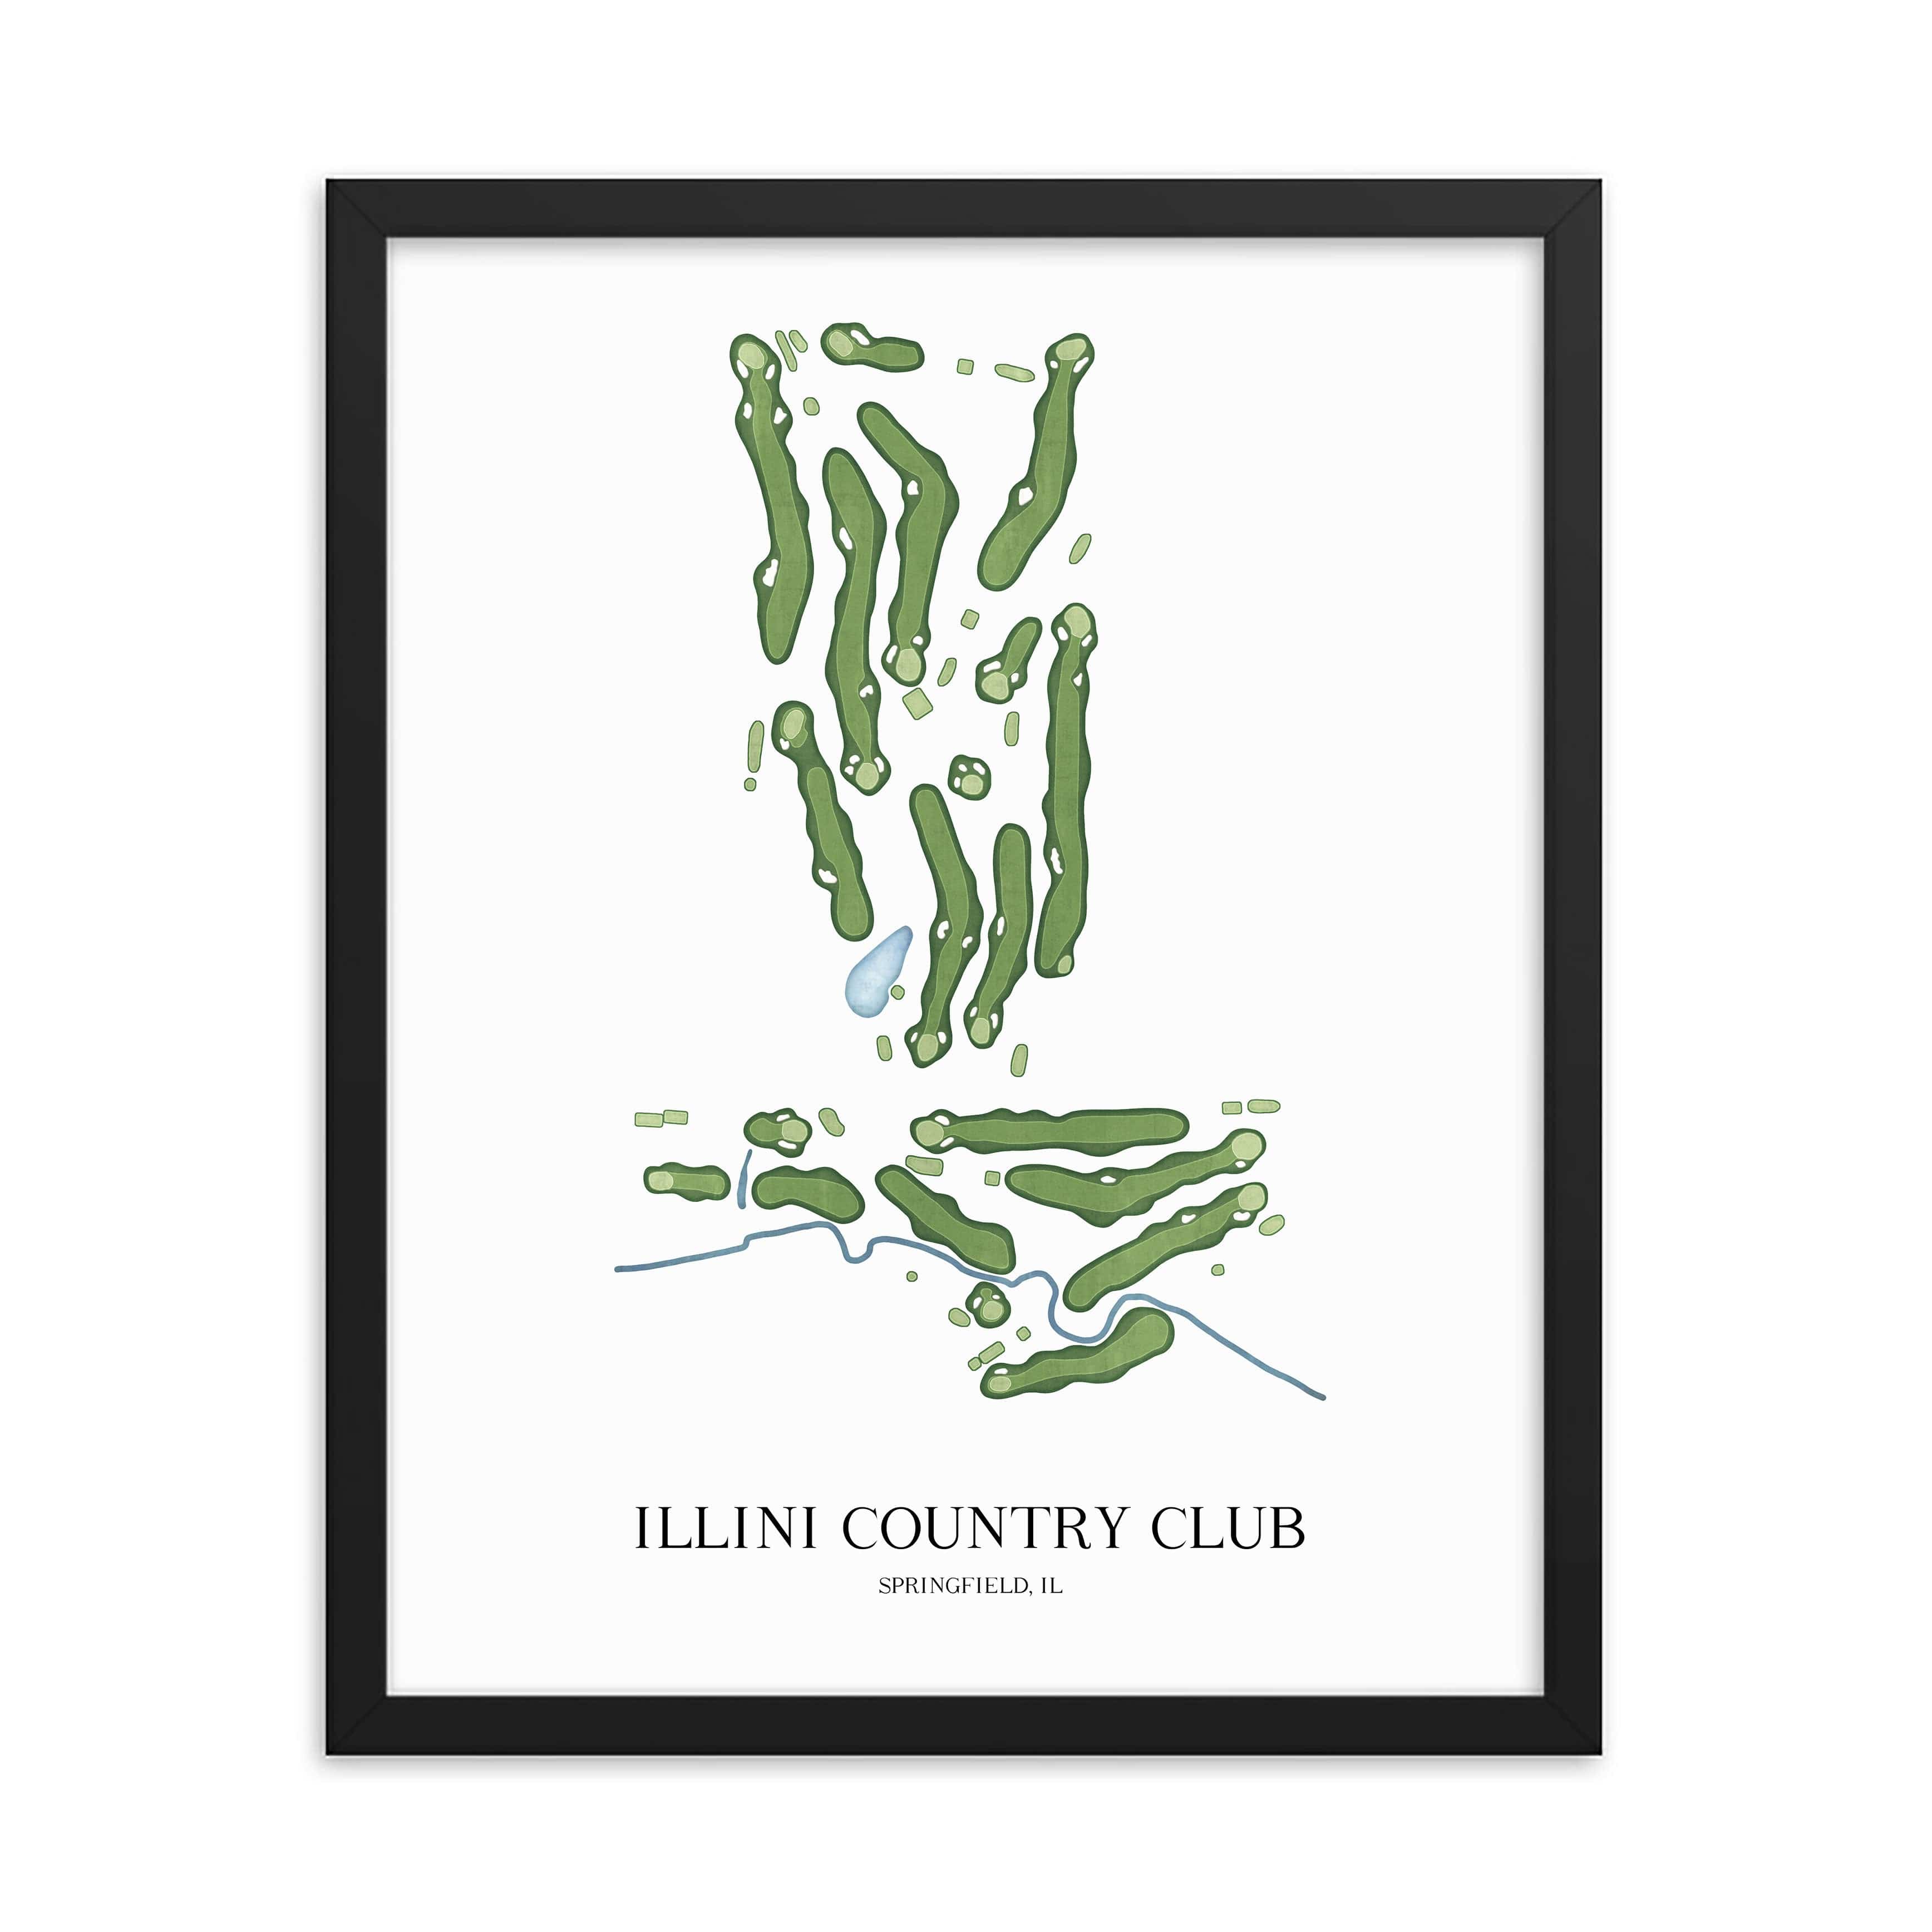 The 19th Hole Golf Shop - Golf Course Prints -  Illini Country Club Golf Course Map